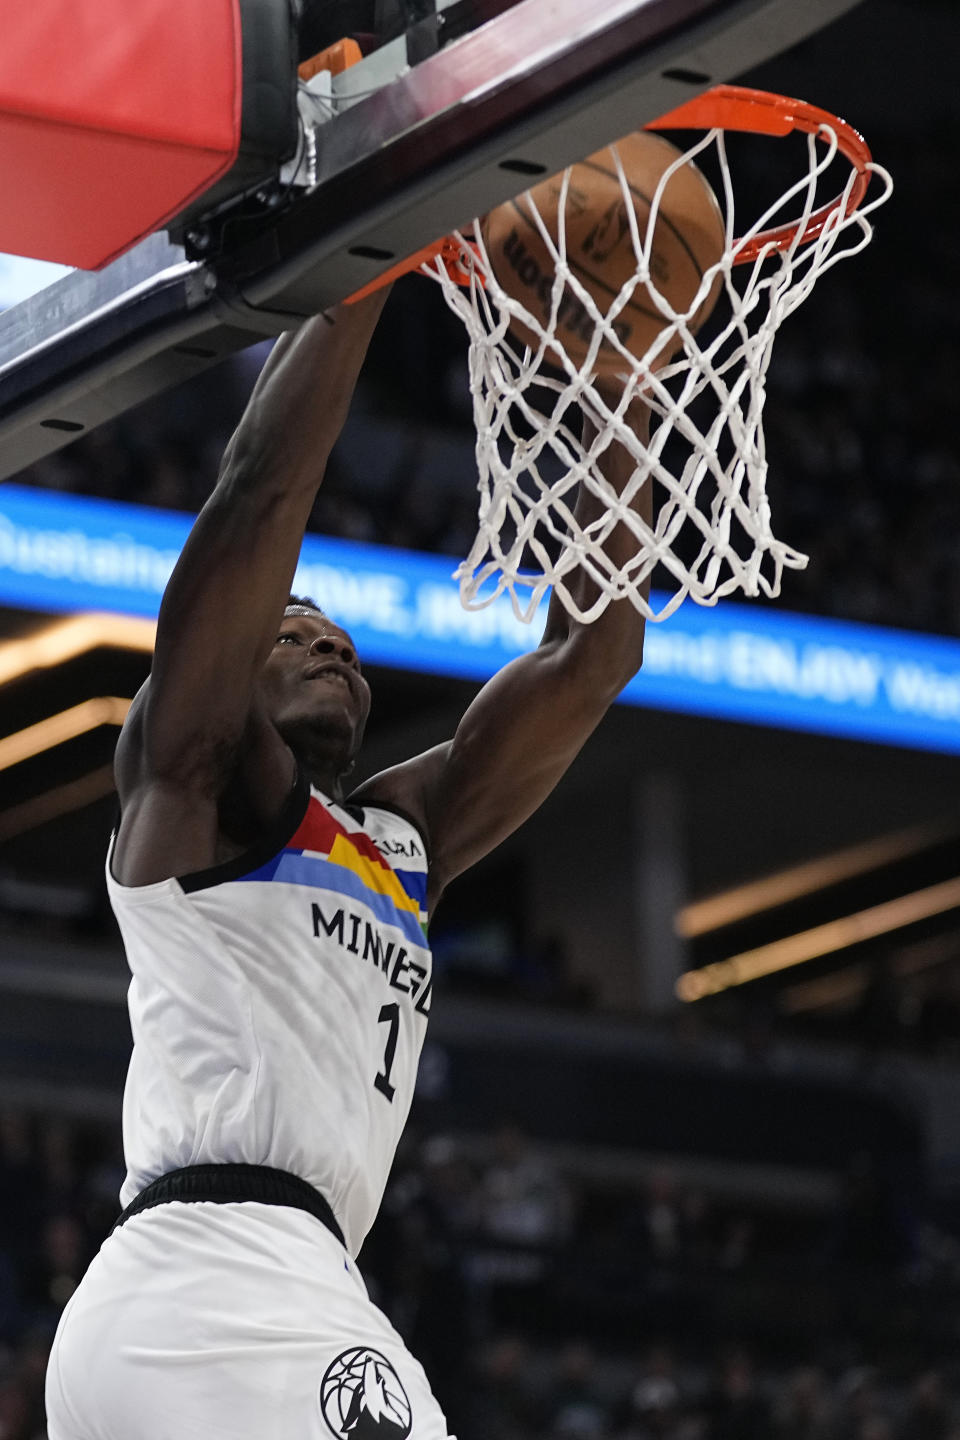 Minnesota Timberwolves guard Anthony Edwards (1) dunks during the second half of an NBA basketball game against the Phoenix Suns, Friday, Jan. 13, 2023, in Minneapolis. (AP Photo/Abbie Parr)